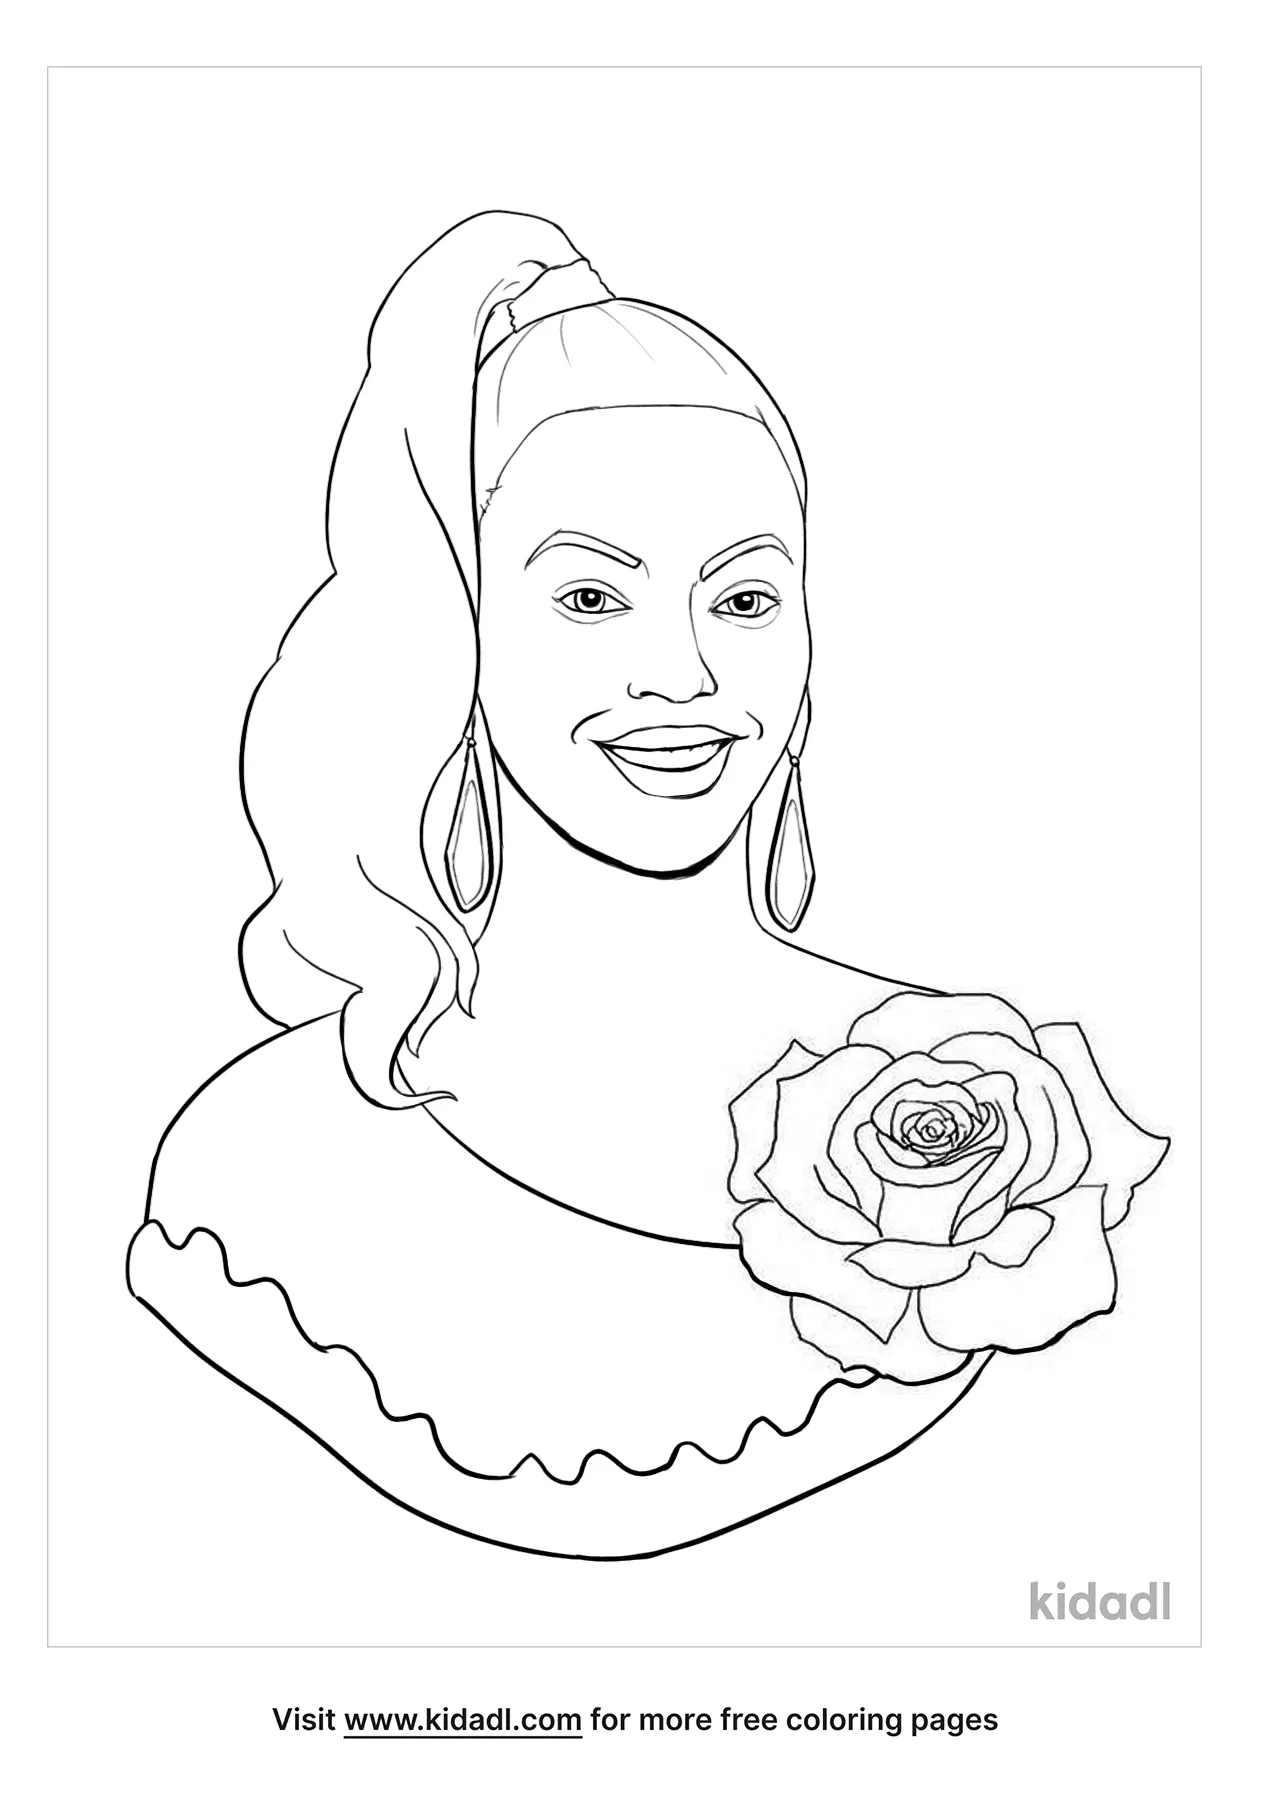 Famous Black People Coloring Pages